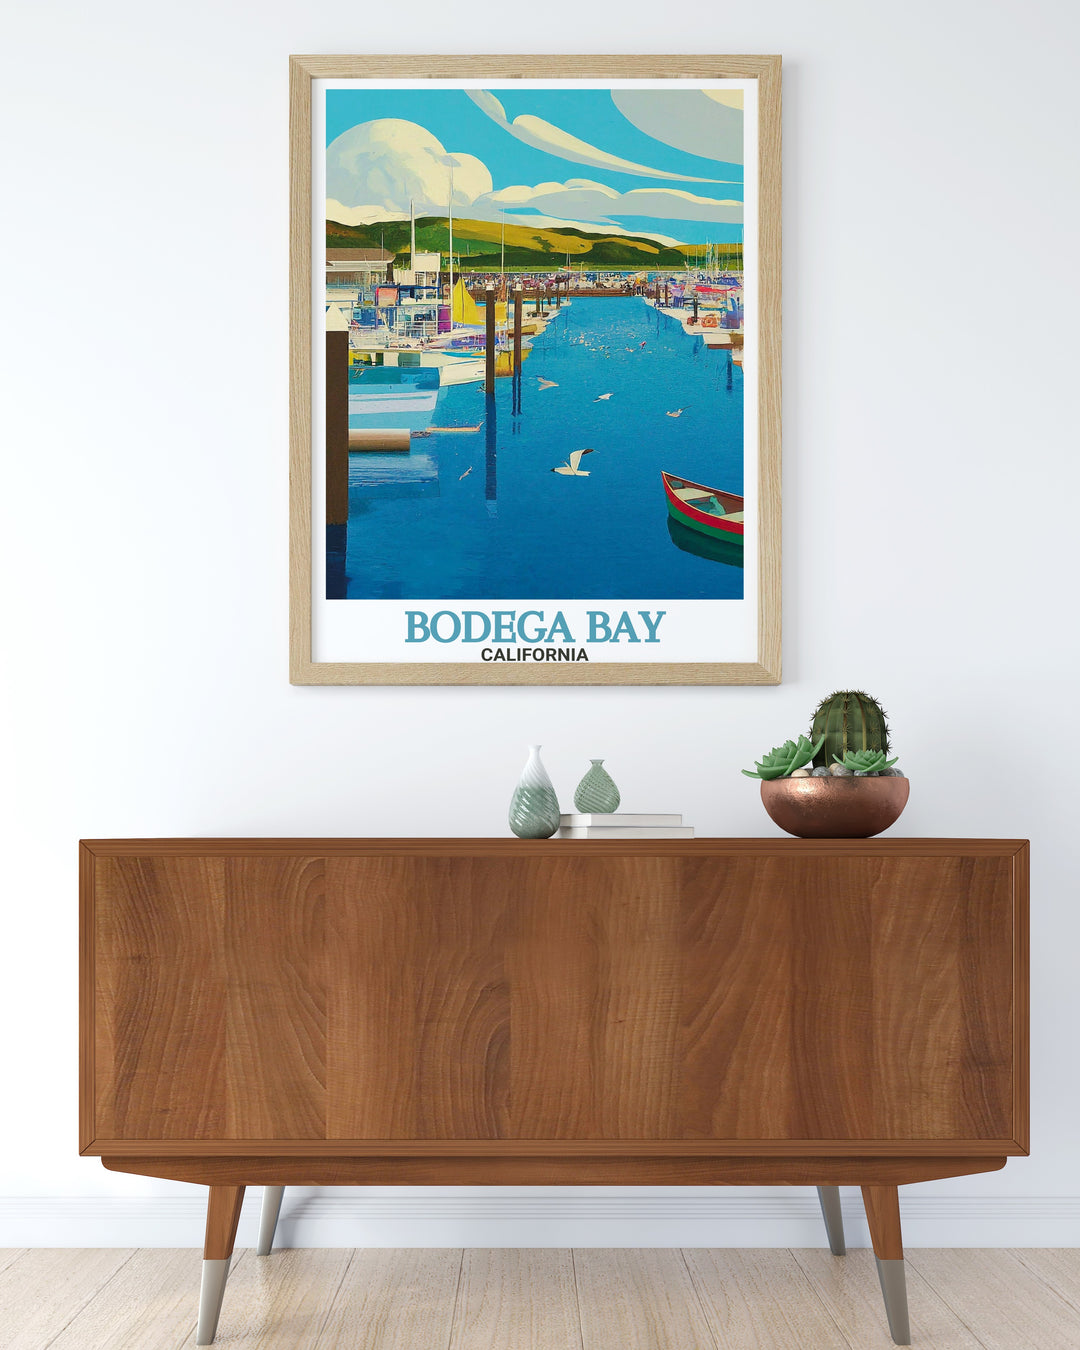 Bodega Bay wall art depicting the serene and picturesque Bodega Bay Marina. This piece enhances any room with its tranquil and vibrant coastal scene. A must have for Bodega Bay travel enthusiasts.